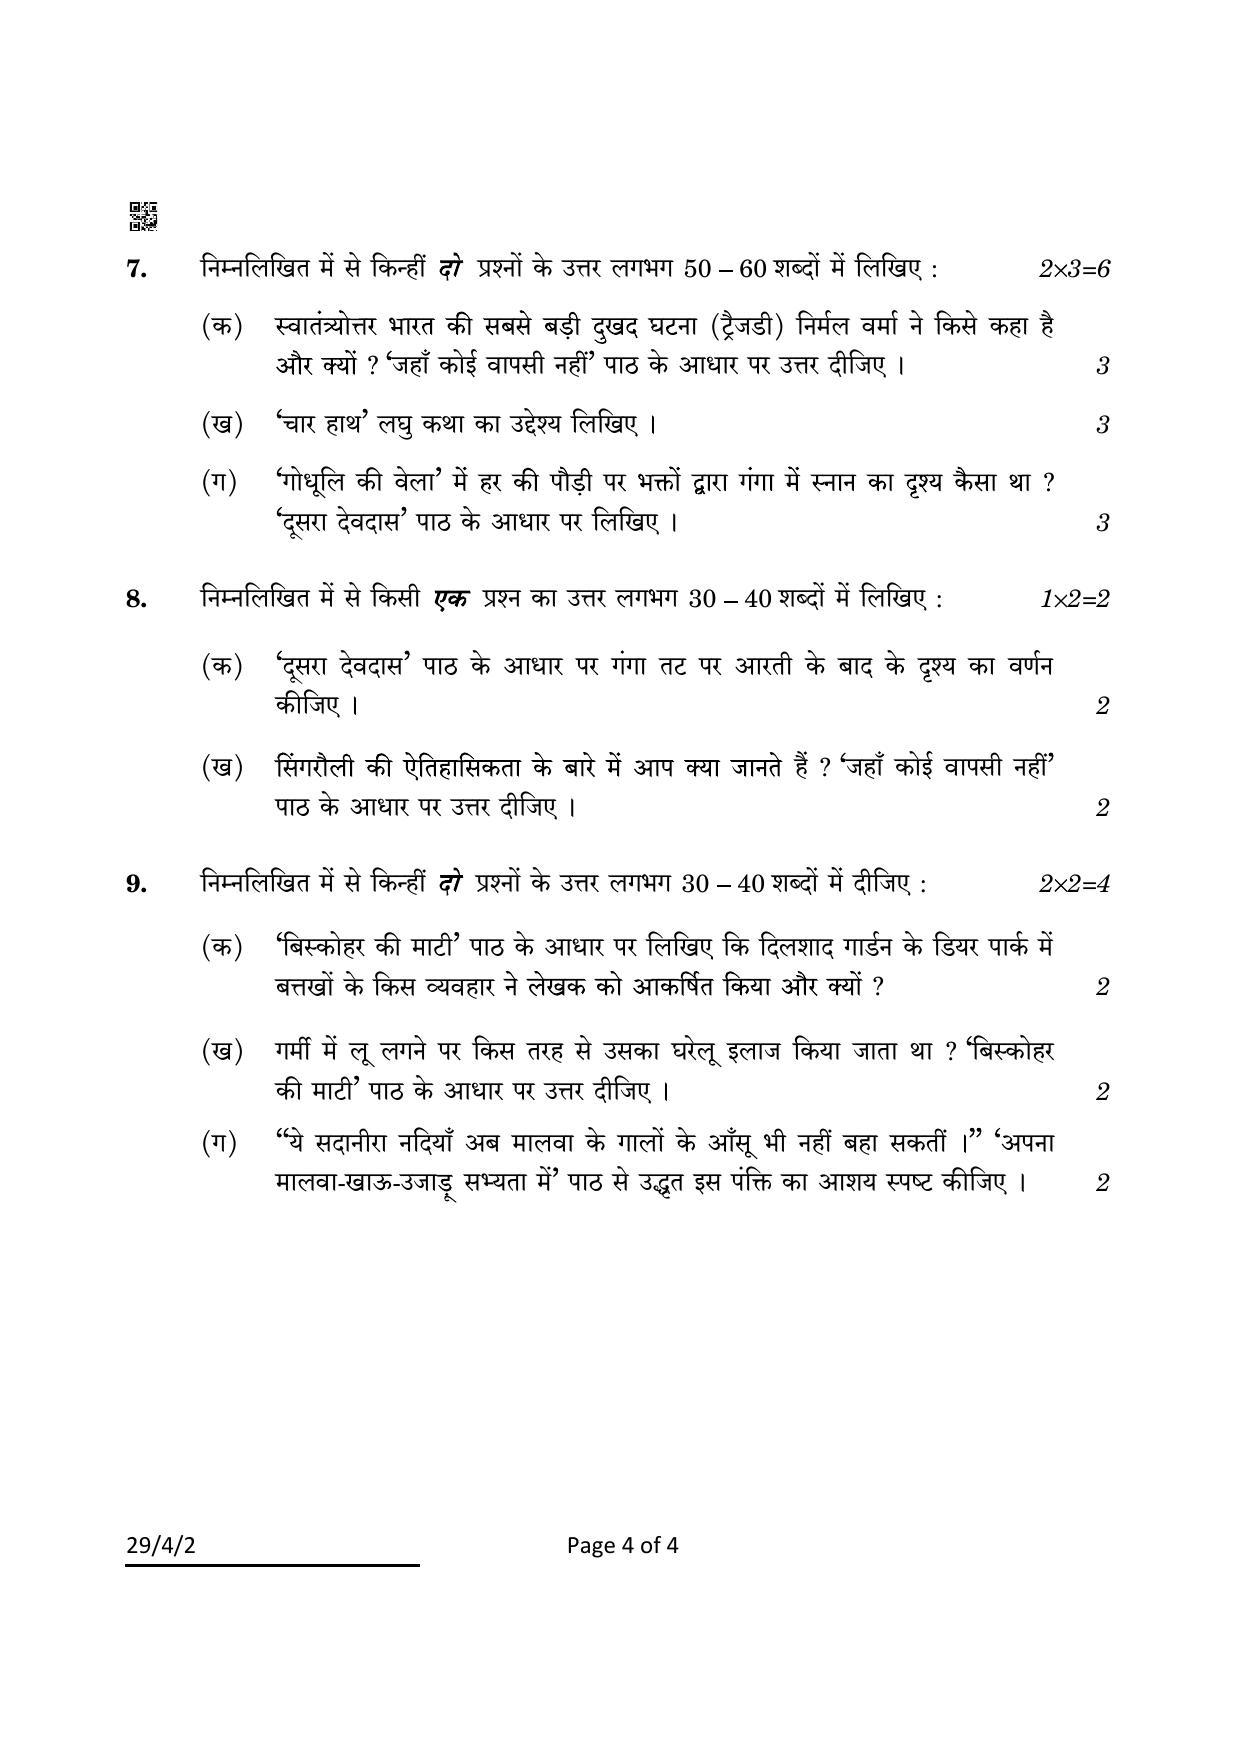 CBSE Class 12 29-4-2 Hindi Elective 2022 Question Paper - Page 4